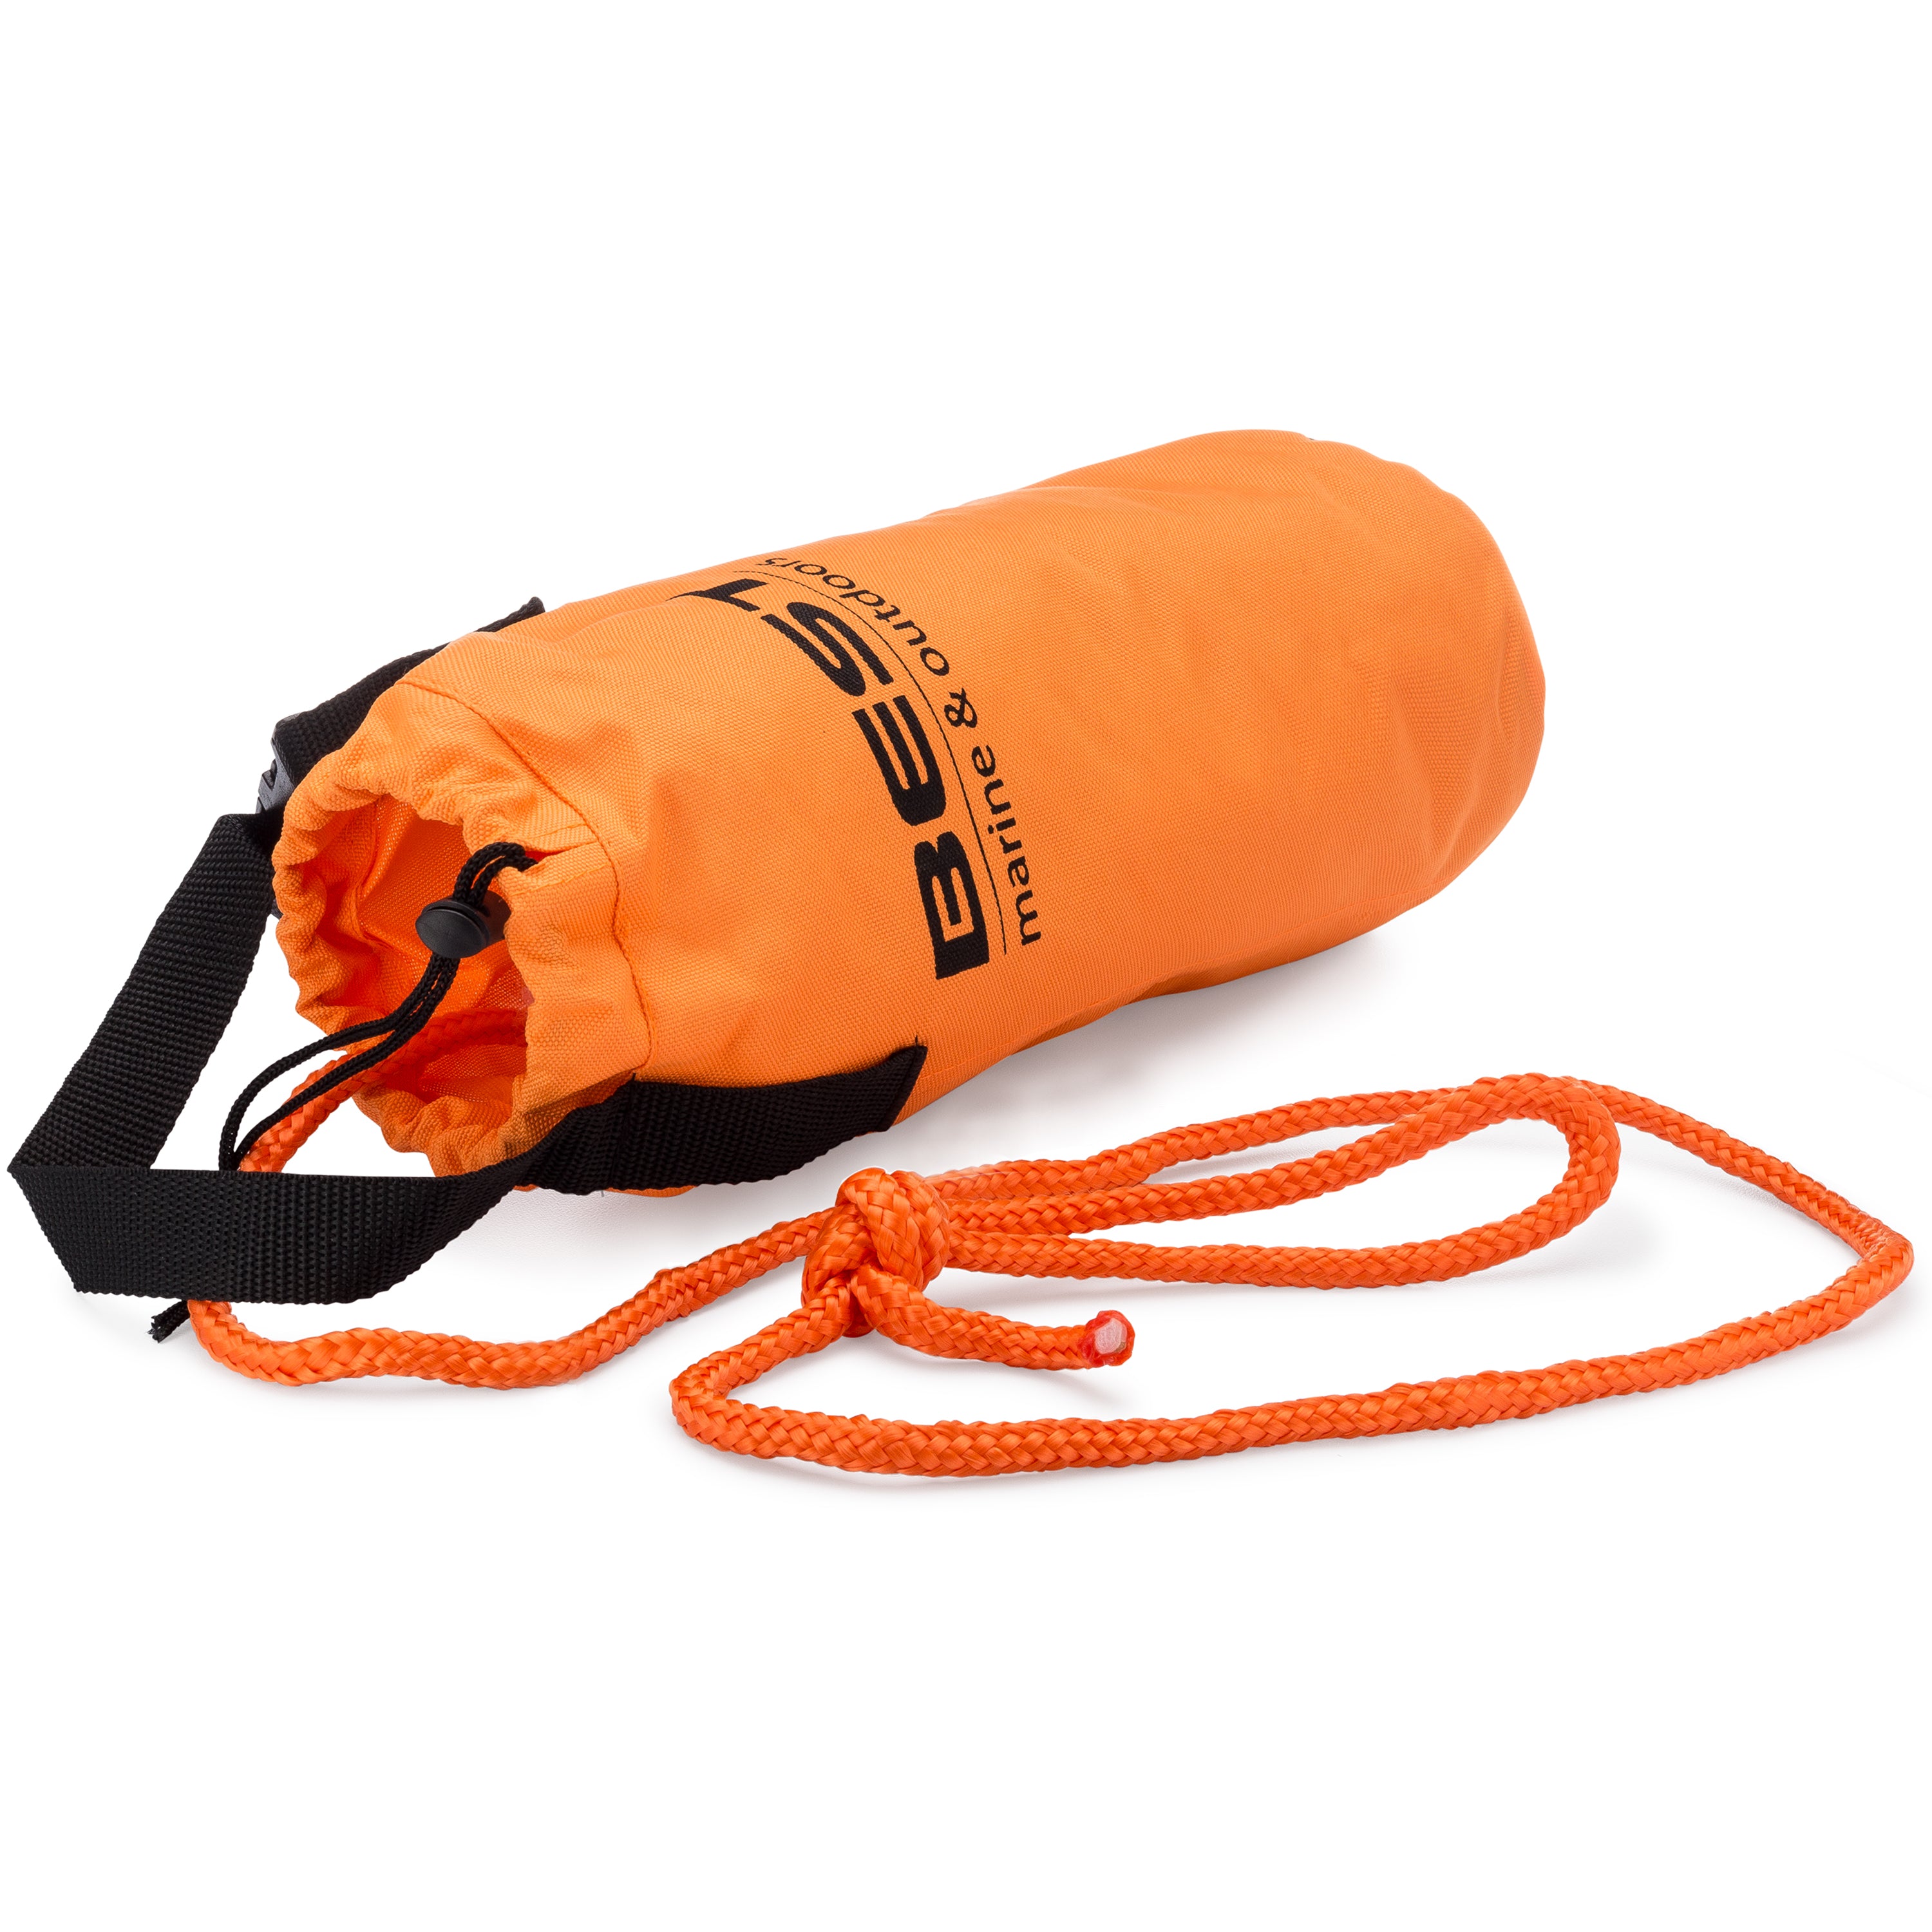 Best Marine and Outdoors Emergency Throw Rope Rescue Bag - Throwable Safety Device for Kayaking & Boating